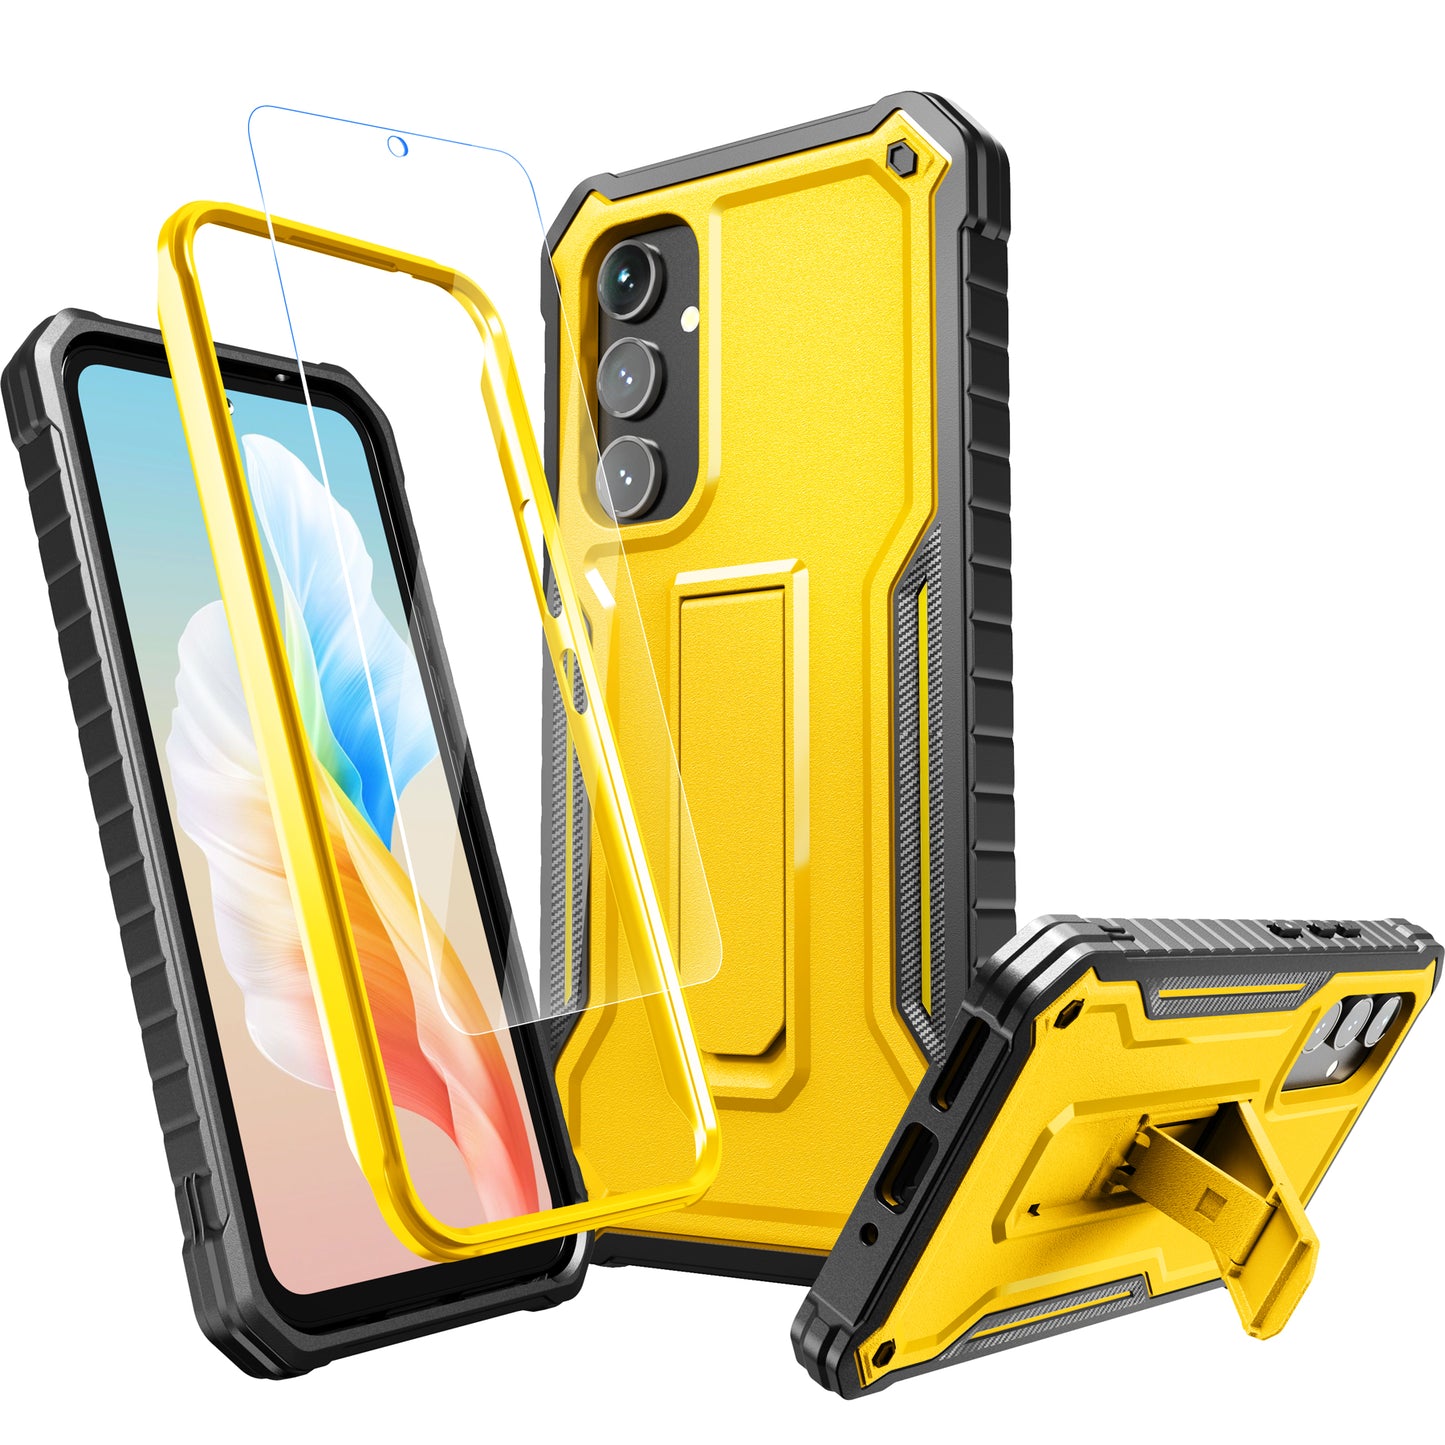 FITO for Samsung Galaxy A54 5G Case, Dual Layer Shockproof Heavy Duty Case Come with Glass Screen Protector, Built-in Kickstand